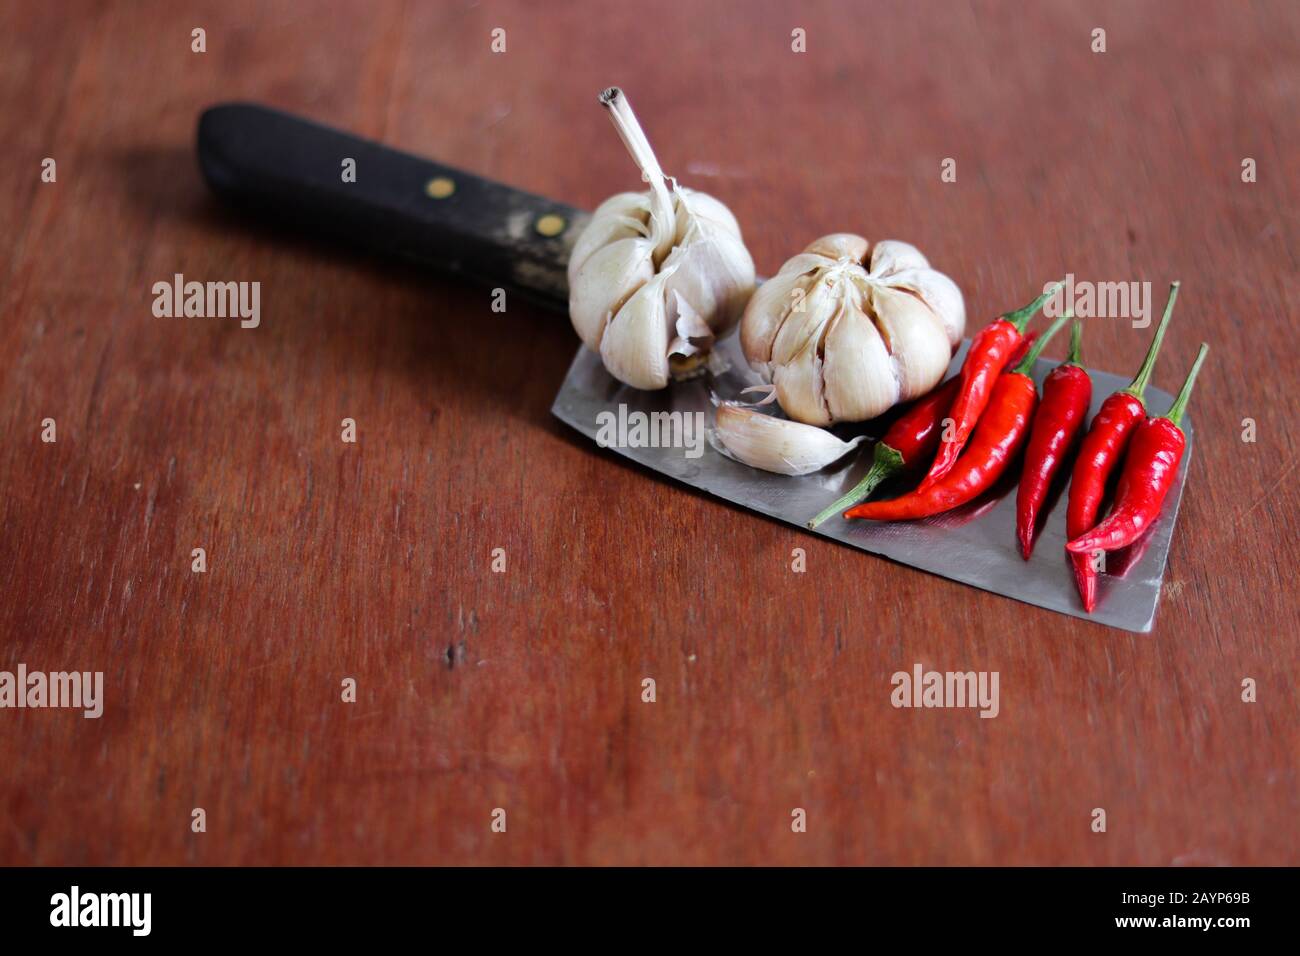 Still life showing concept of gastronomy, cooking, cuisine and clean organic diet Stock Photo